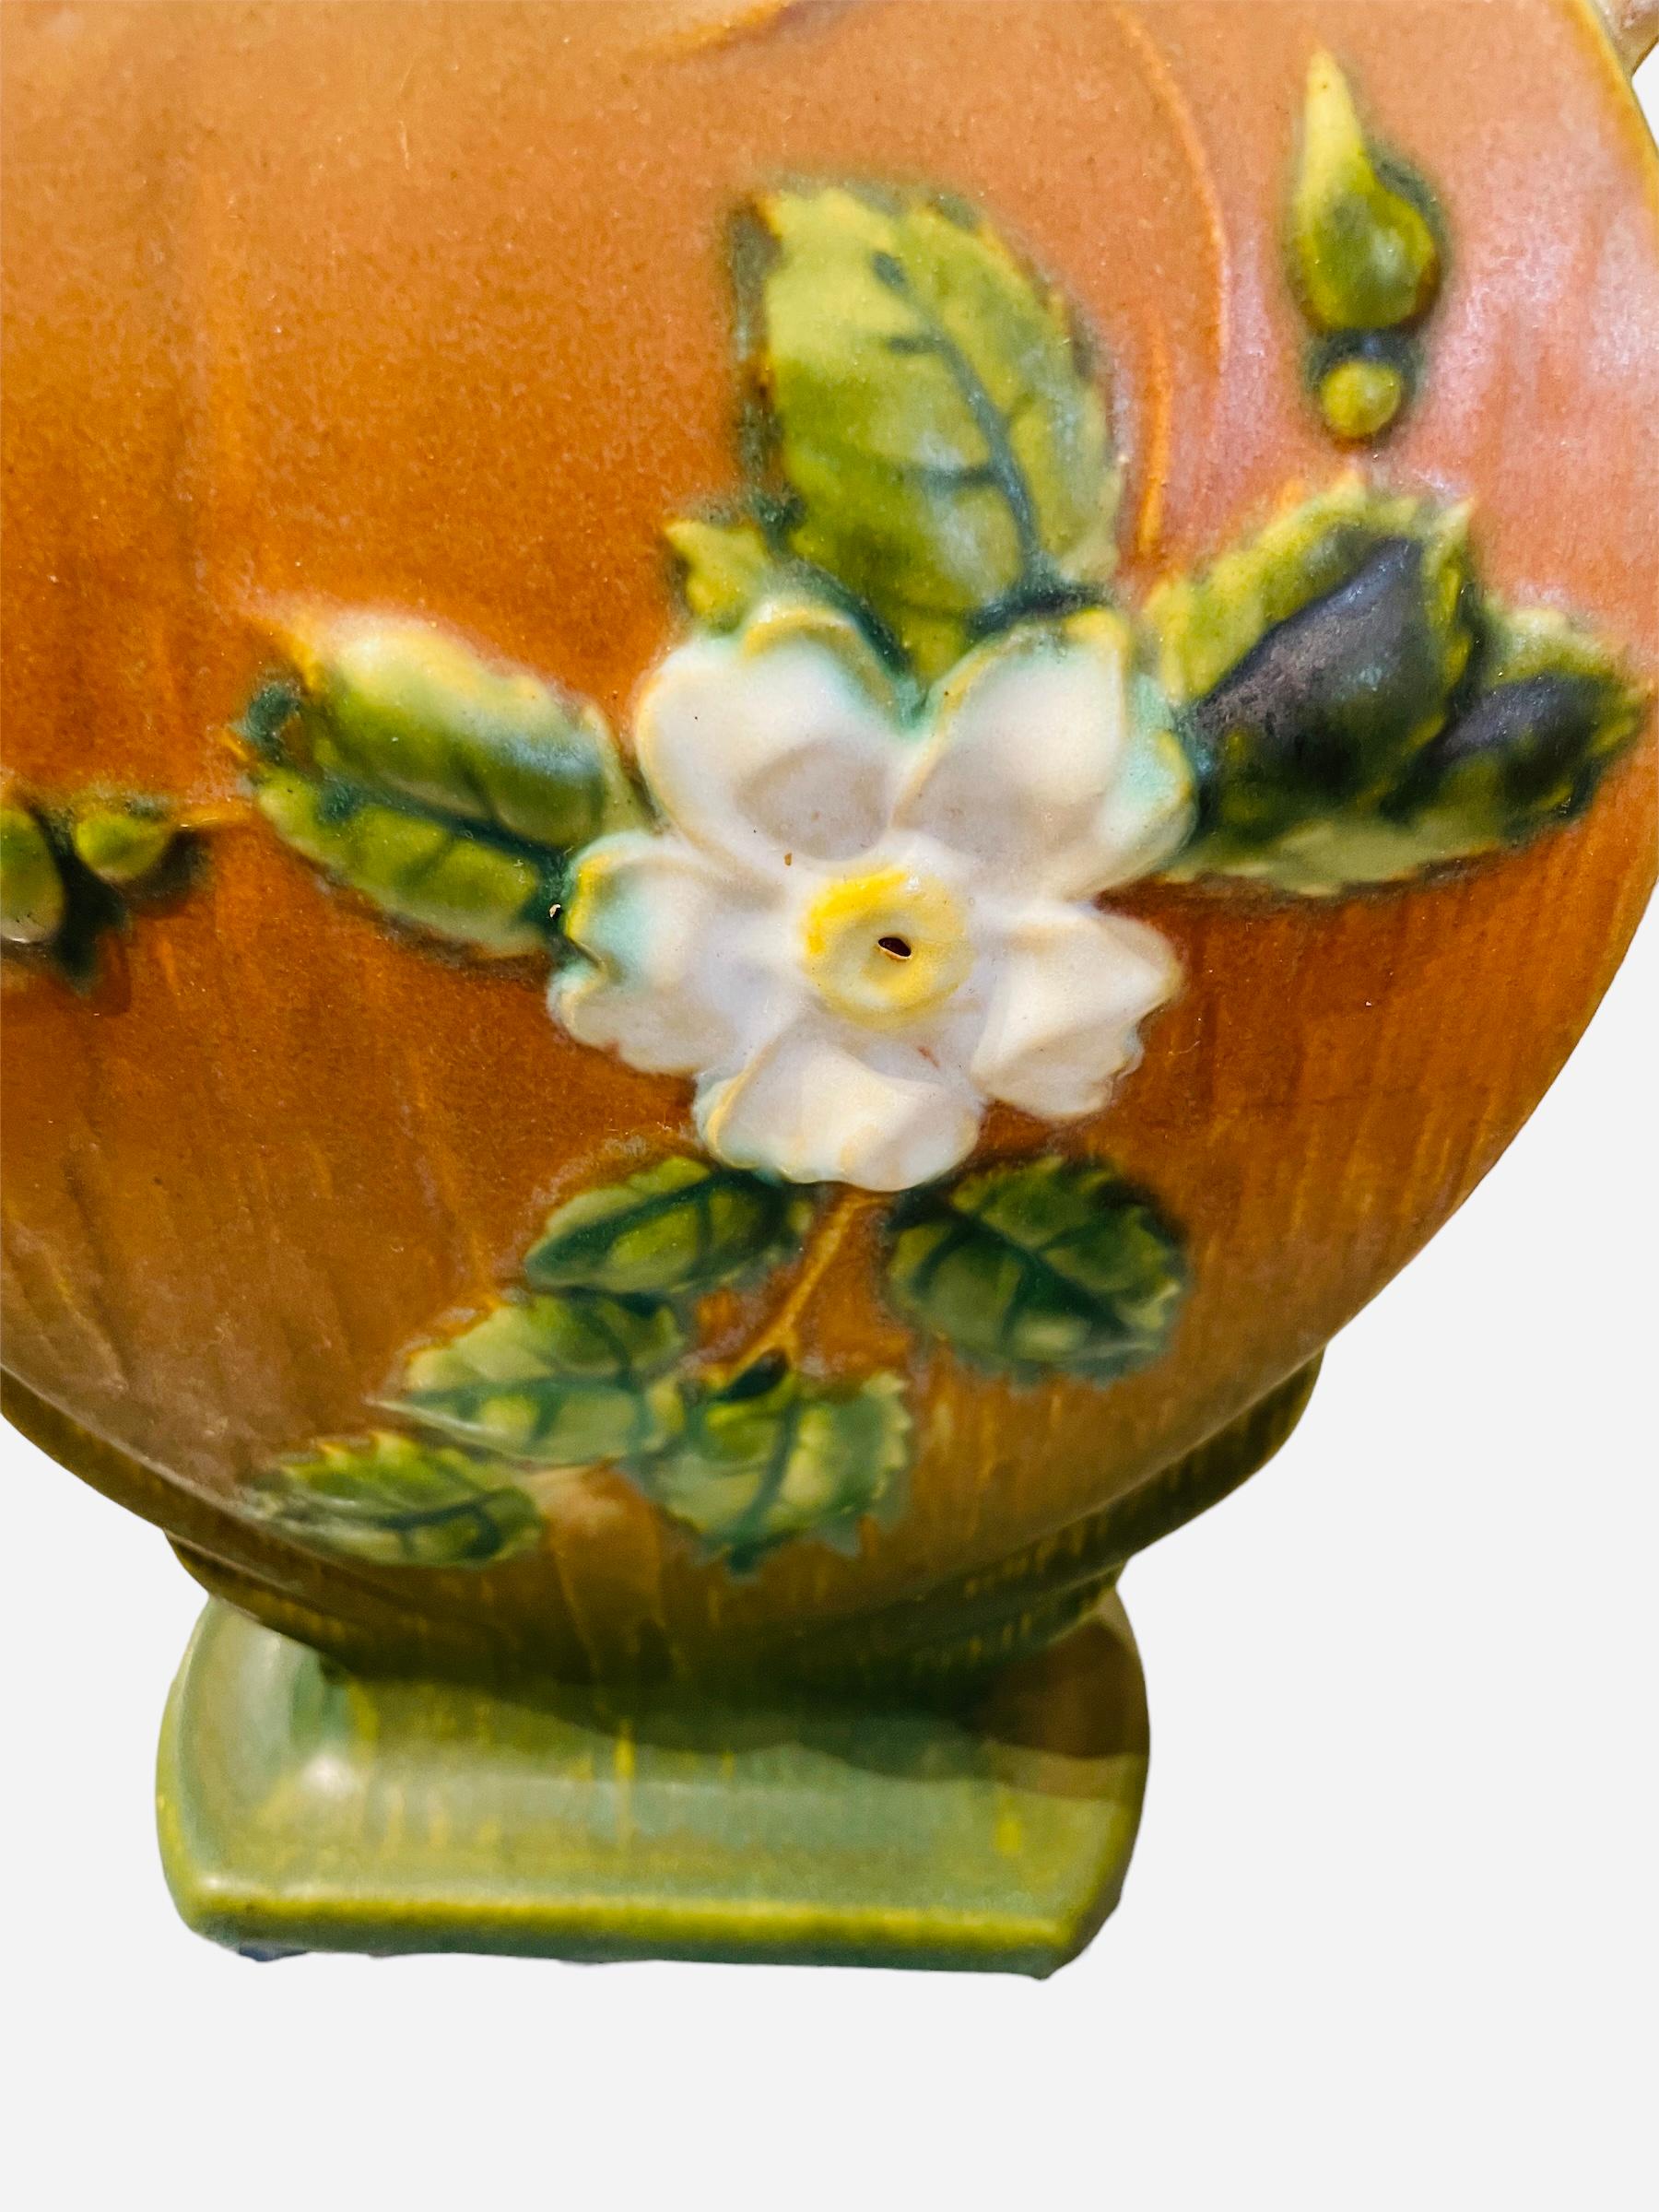 This is a Roseville Pottery White Rose flower heart shaped vase. The vase is green and brick color and adorned with a relief of White Roses flowers, green leaves and buds in the back and front. The upper rim is scalloped. The heart shaped vase is